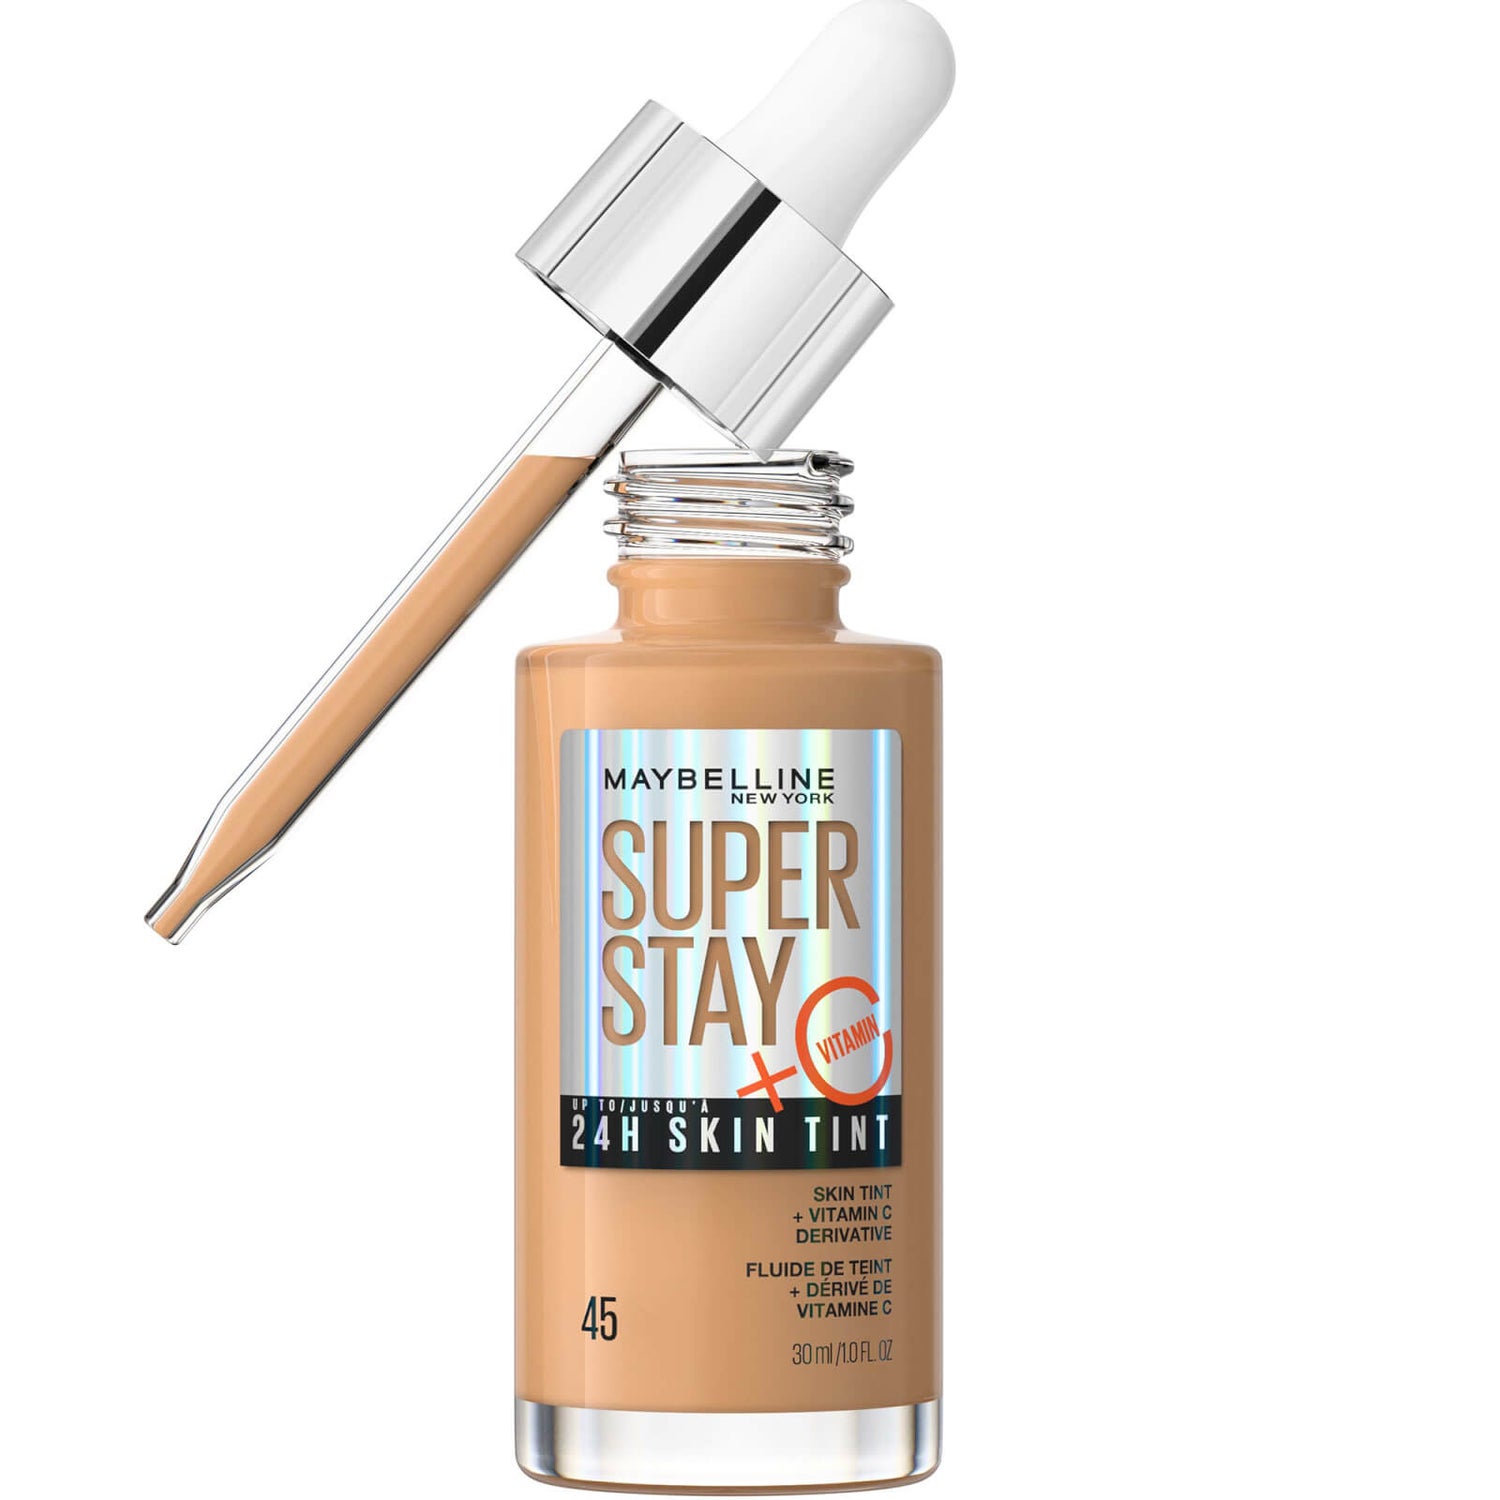 Maybelline Super Stay up to 24H Skin Tint Foundation + Vitamin C 30ml (Various Shades)